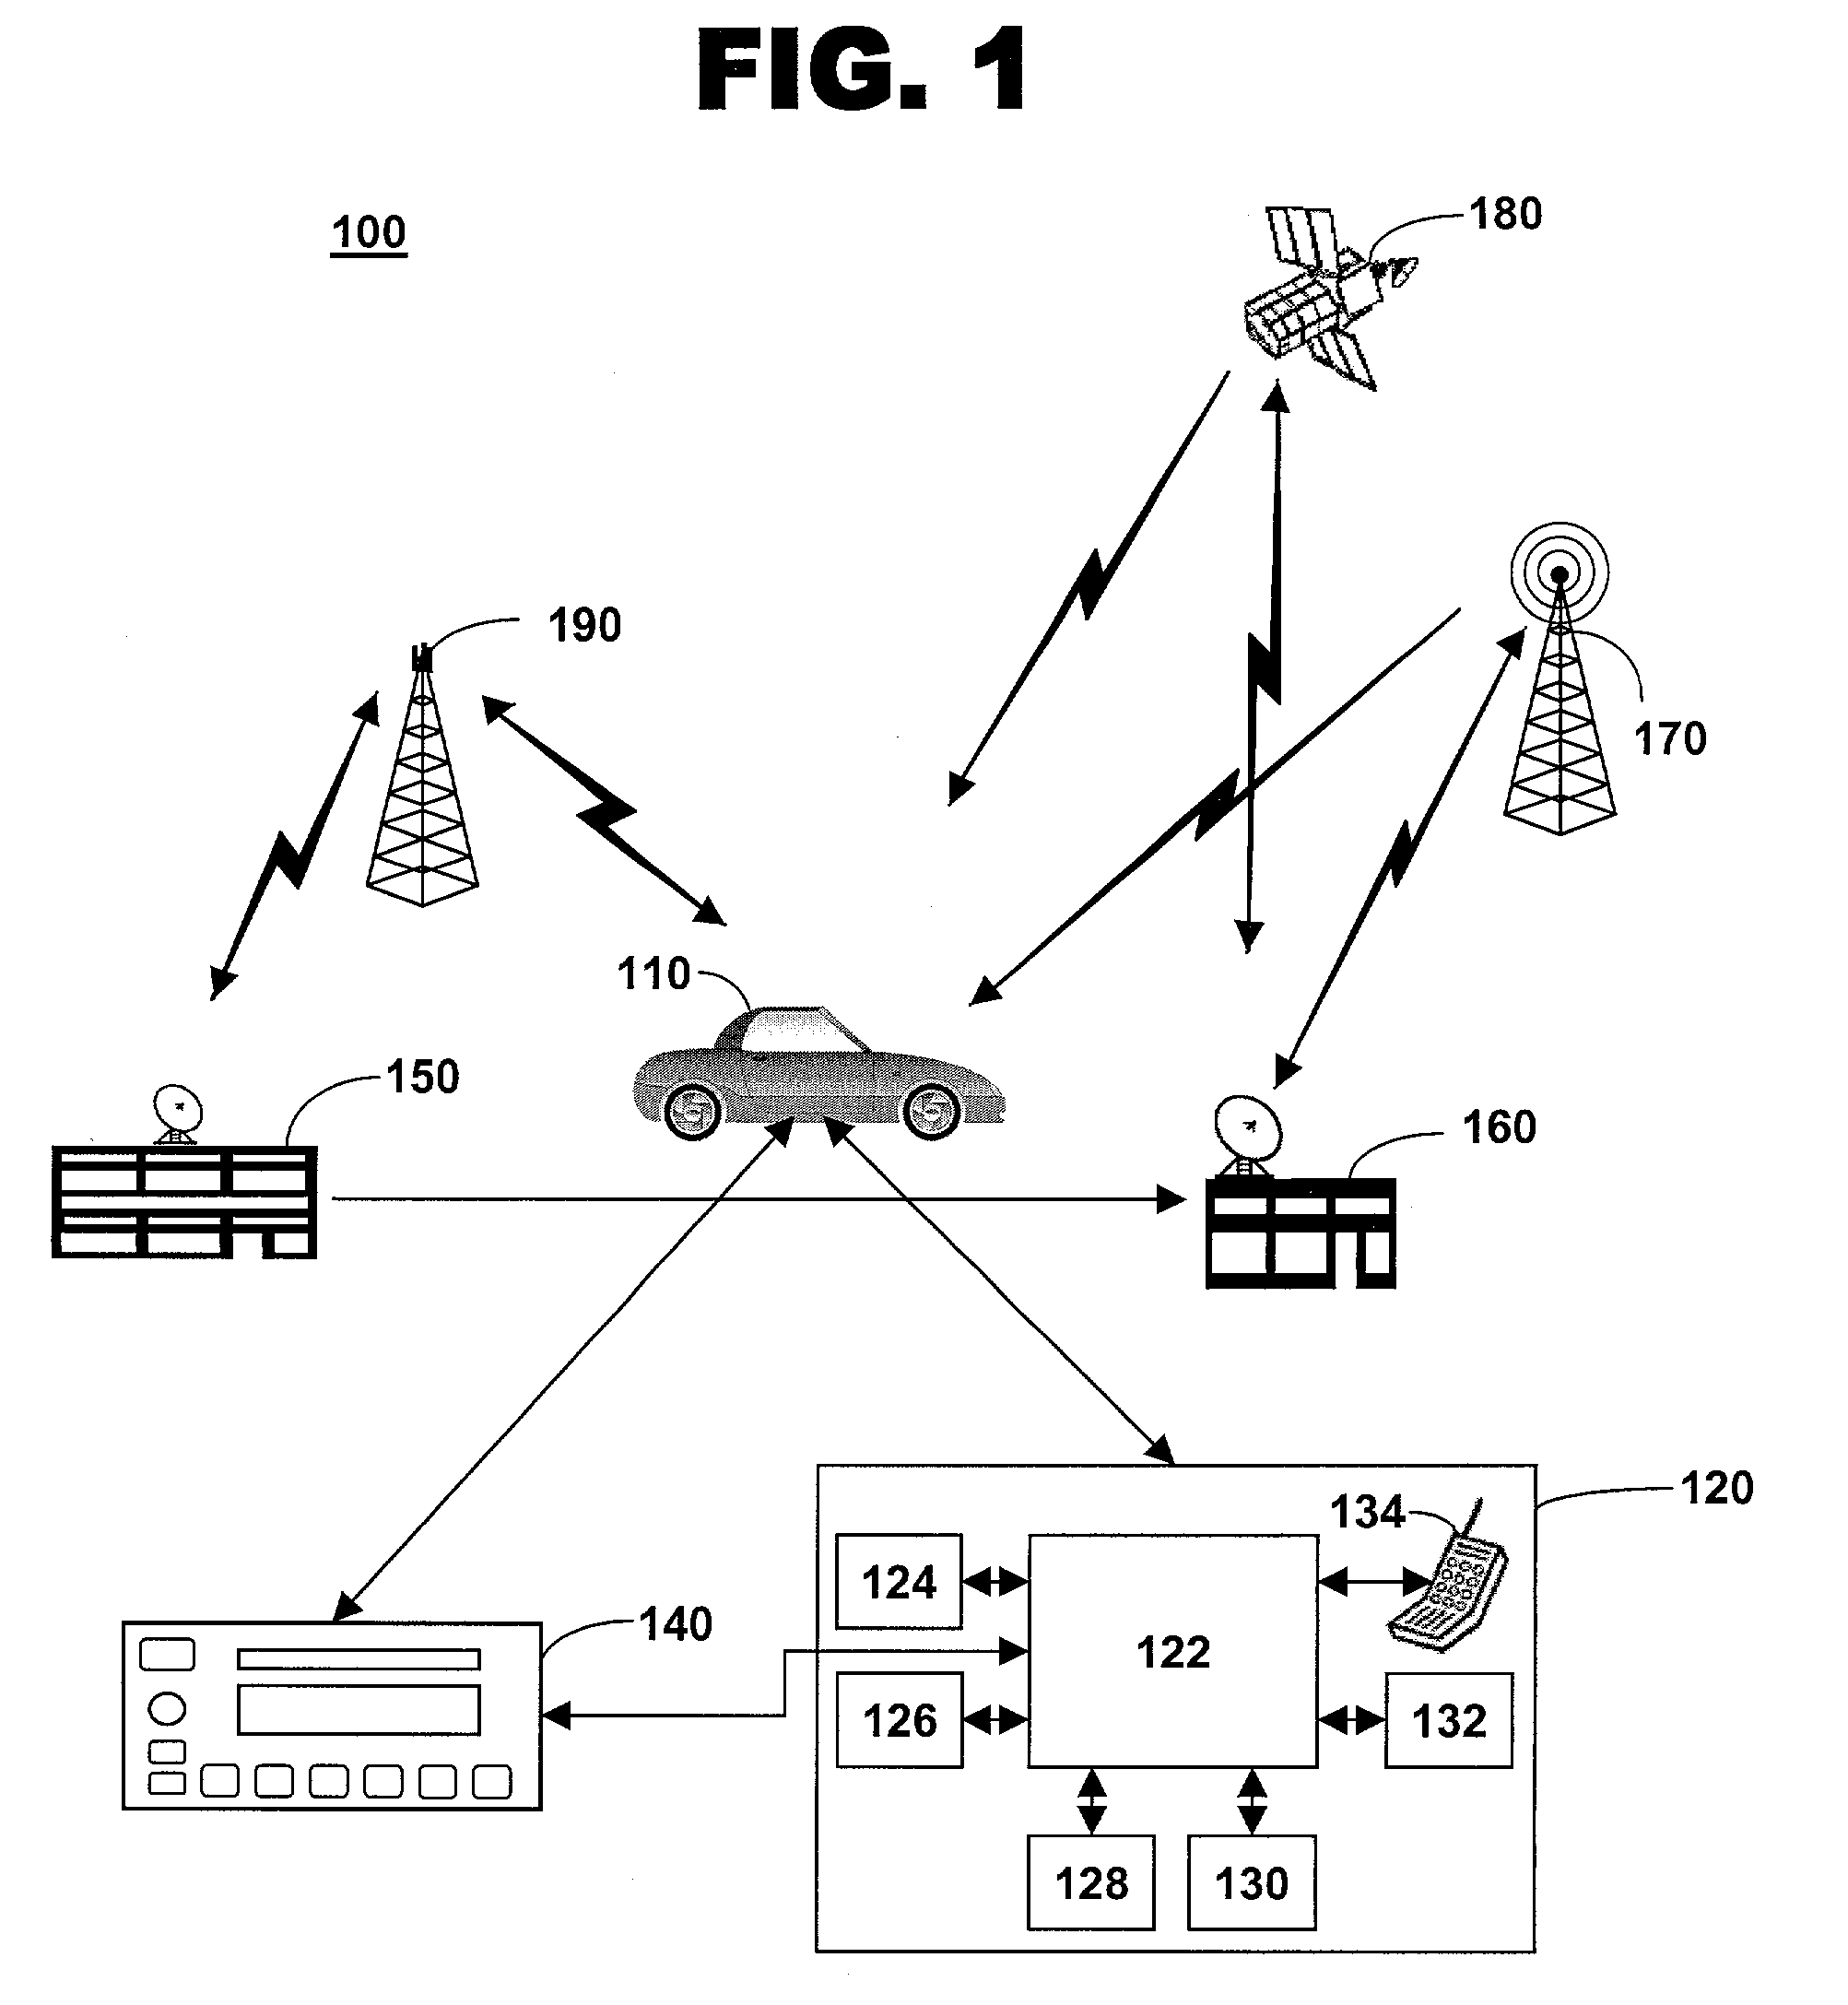 Method of communicating with a quiescent vehicle